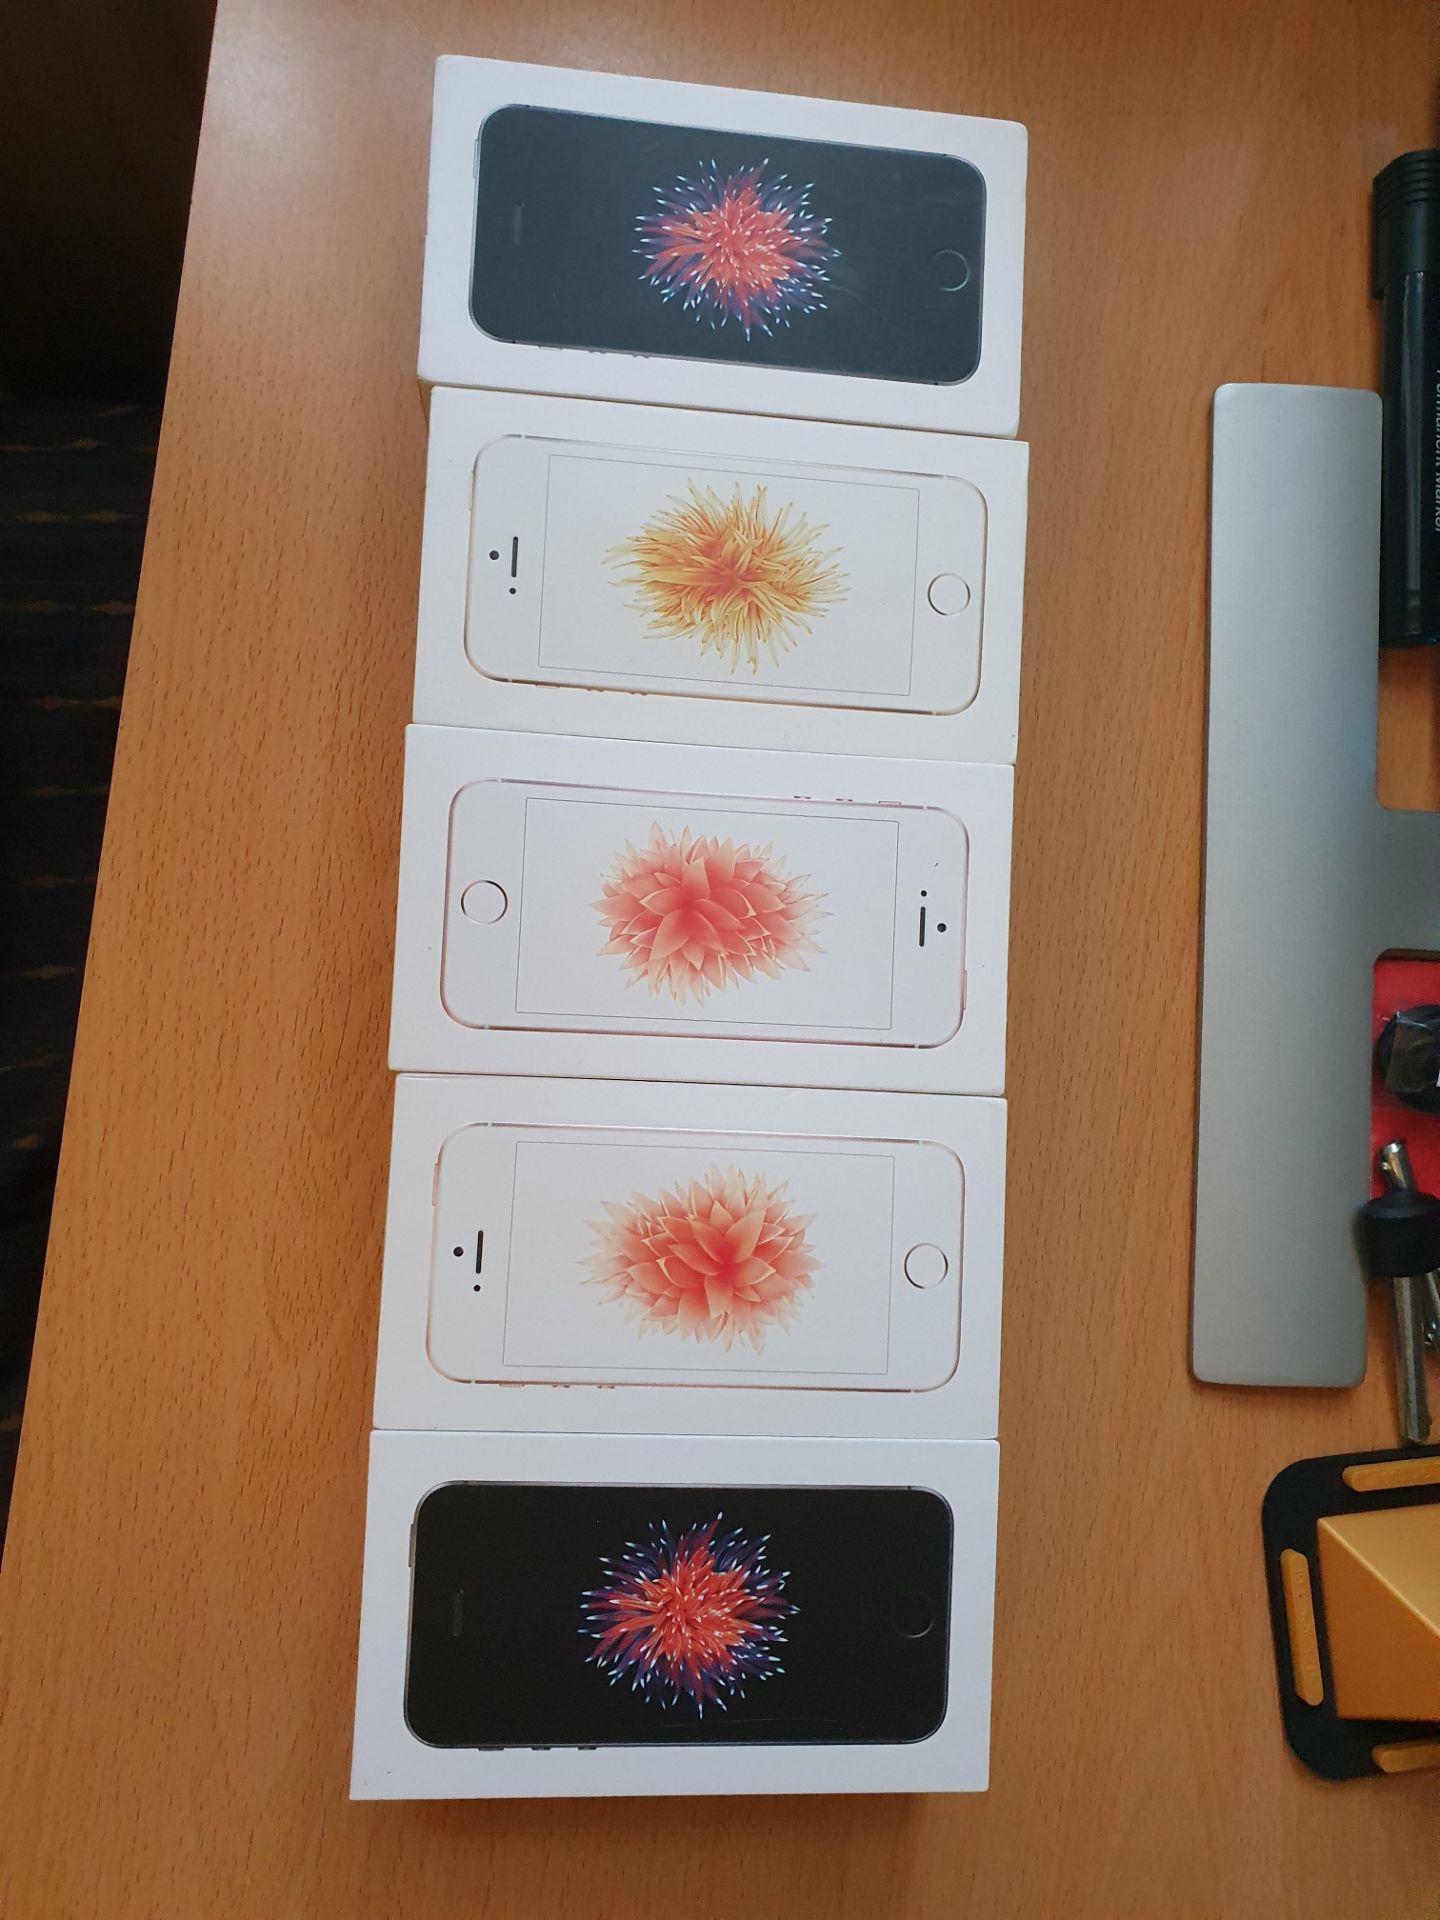 5 x iphone se boxes with original apple cahrgers rrp225 - Image 4 of 5